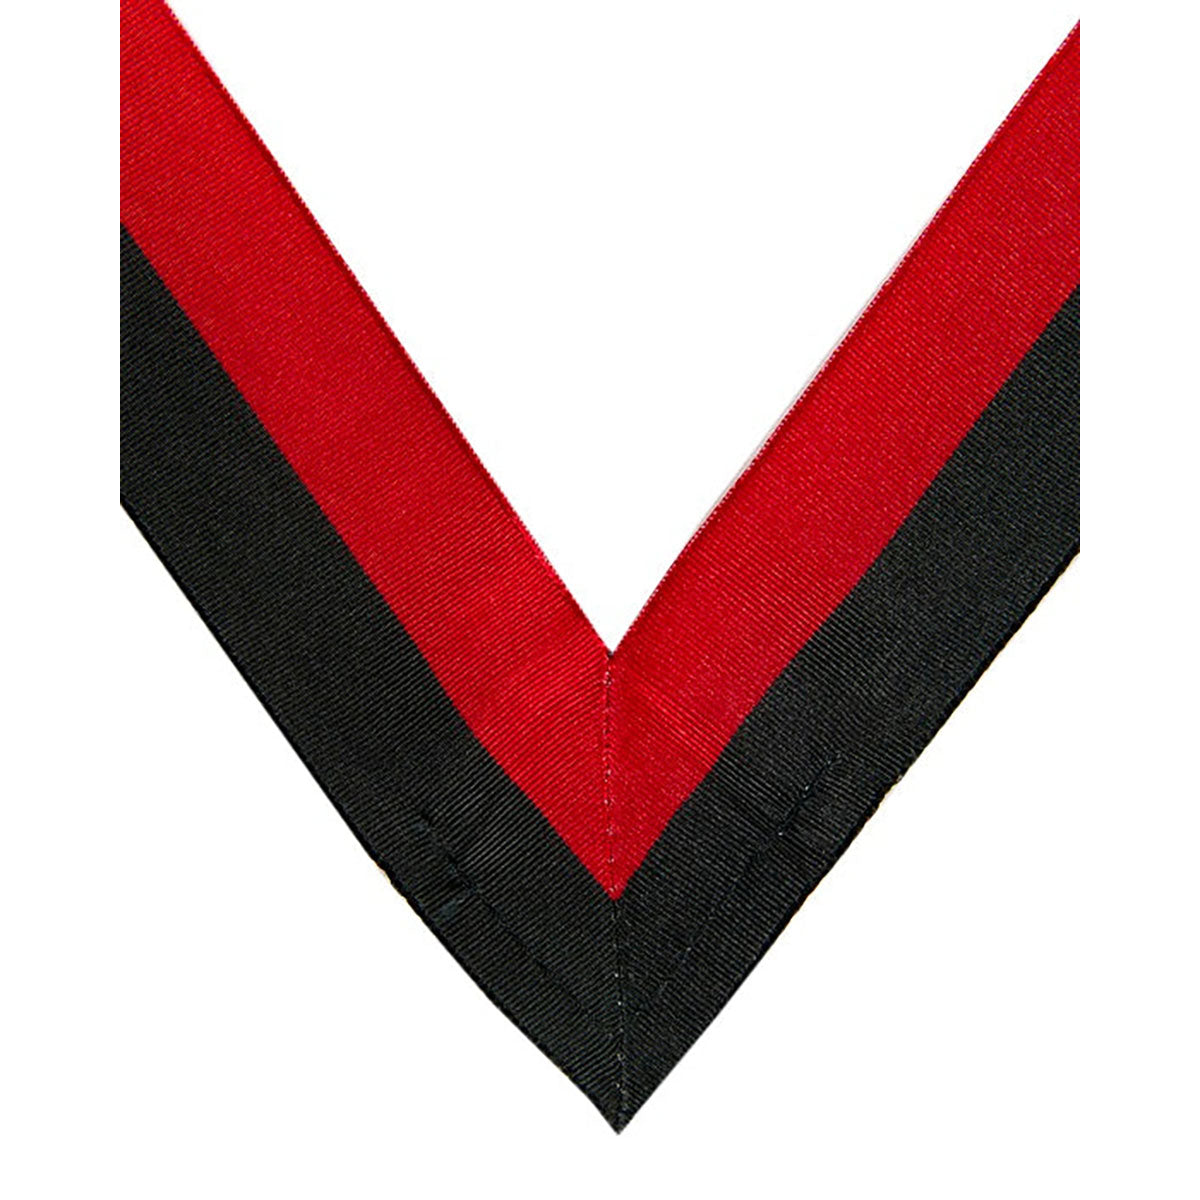 Warden Replacement Ribbon - Black/Red